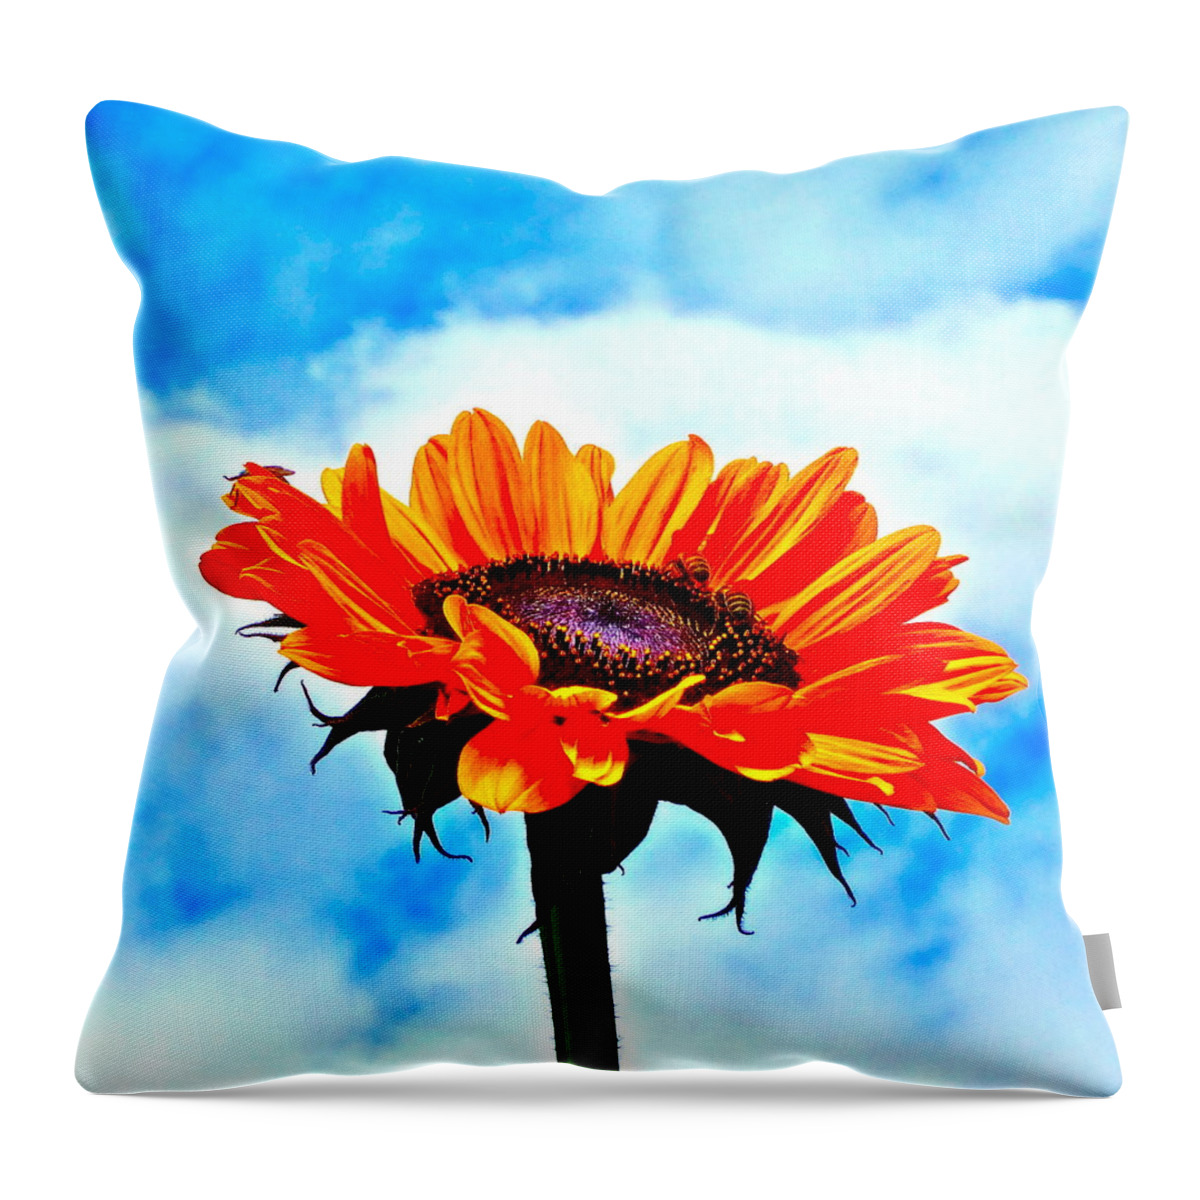 Photograph Of Sunflower With Blue Sky Throw Pillow featuring the photograph Devotion by Gwyn Newcombe